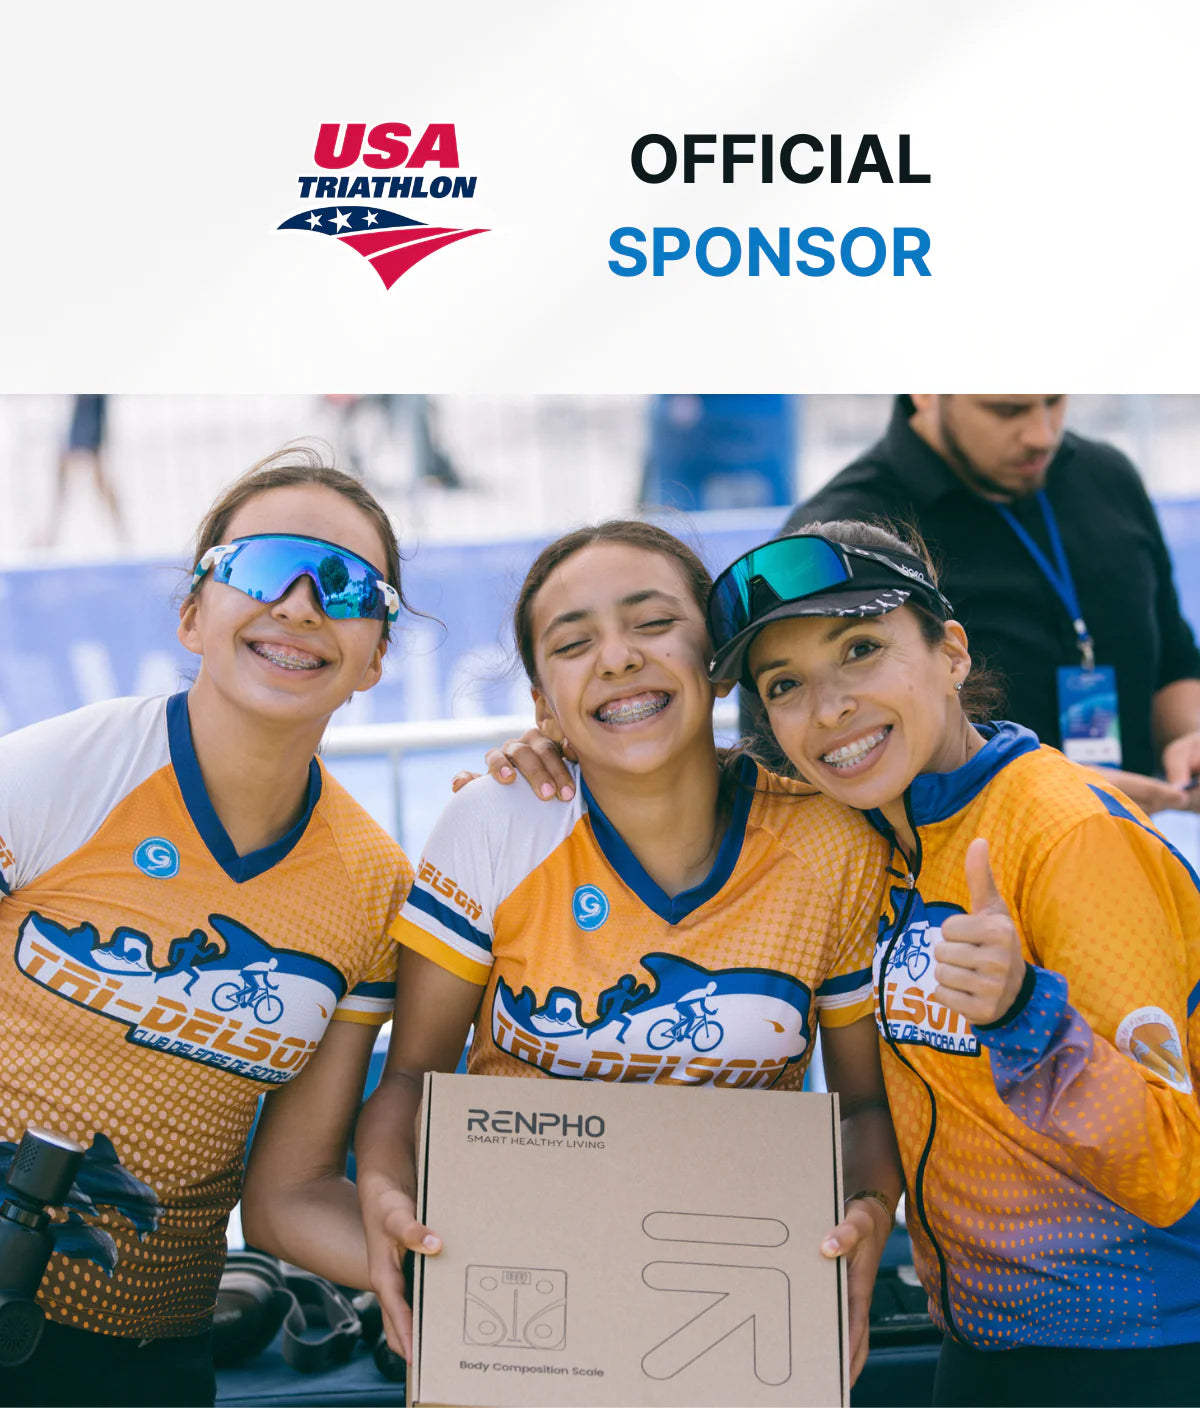 Three female cyclists, wearing USA Triathlon jerseys and sunglasses, smiling and embracing each other at a fitness event. One holds a cardboard box with the Elis Solar Smart Body Scale sponsor logo. "Official Sponsor" text and USA Tri